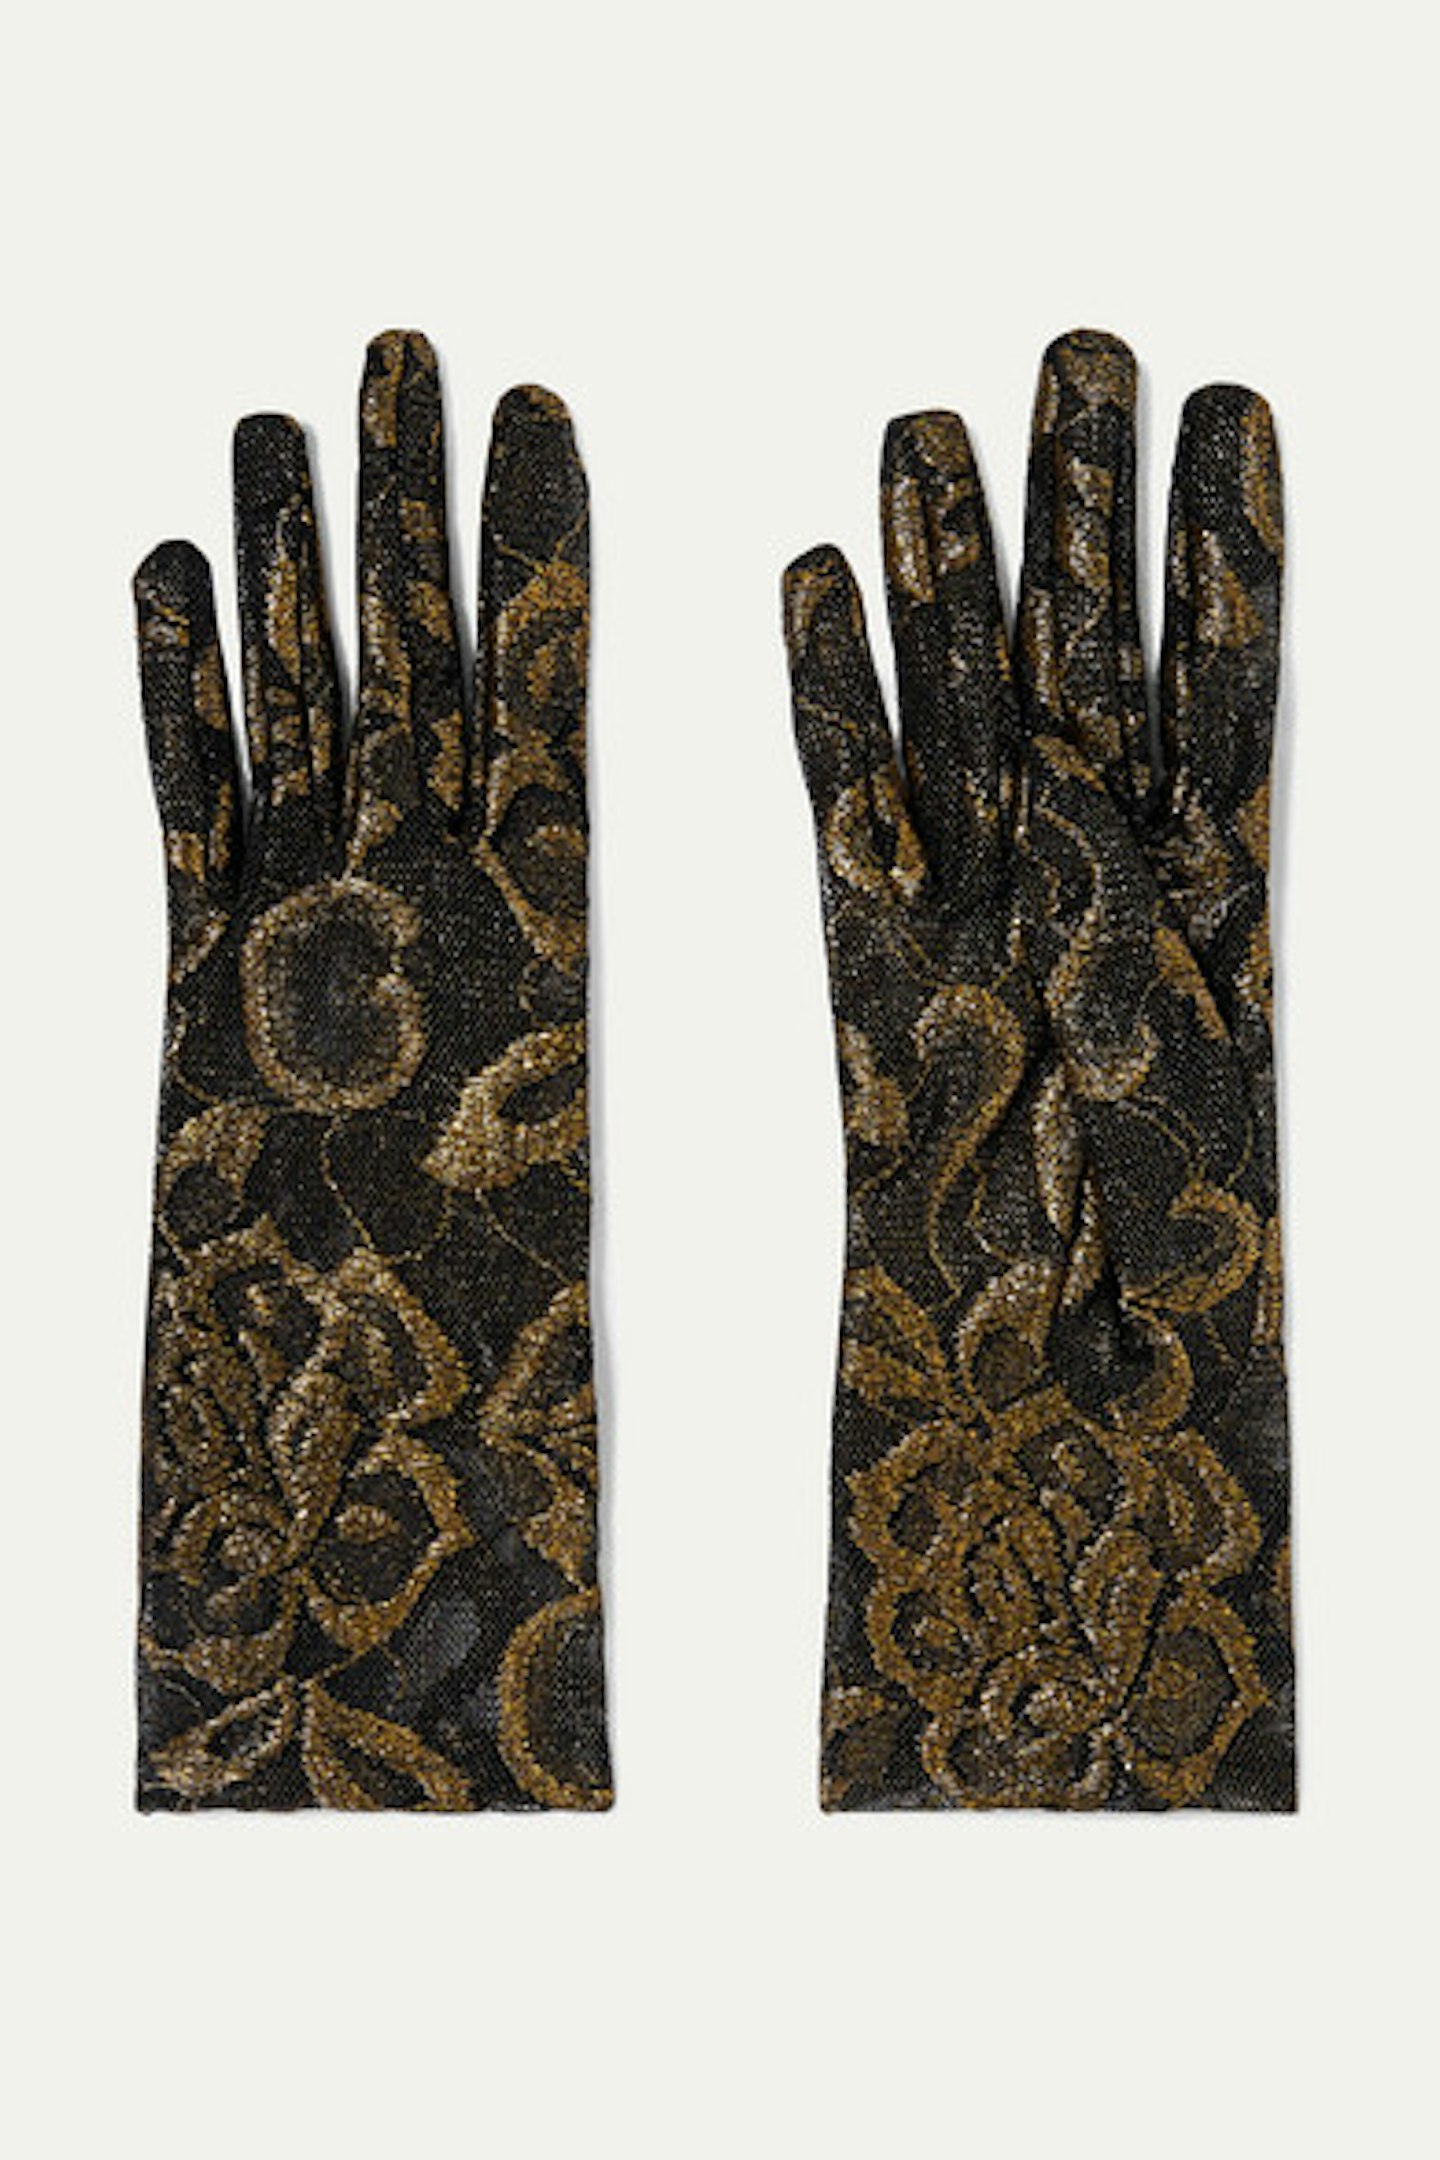 Gucci, Embroidered Tulle Gloves, £190 at Net-a-Porter